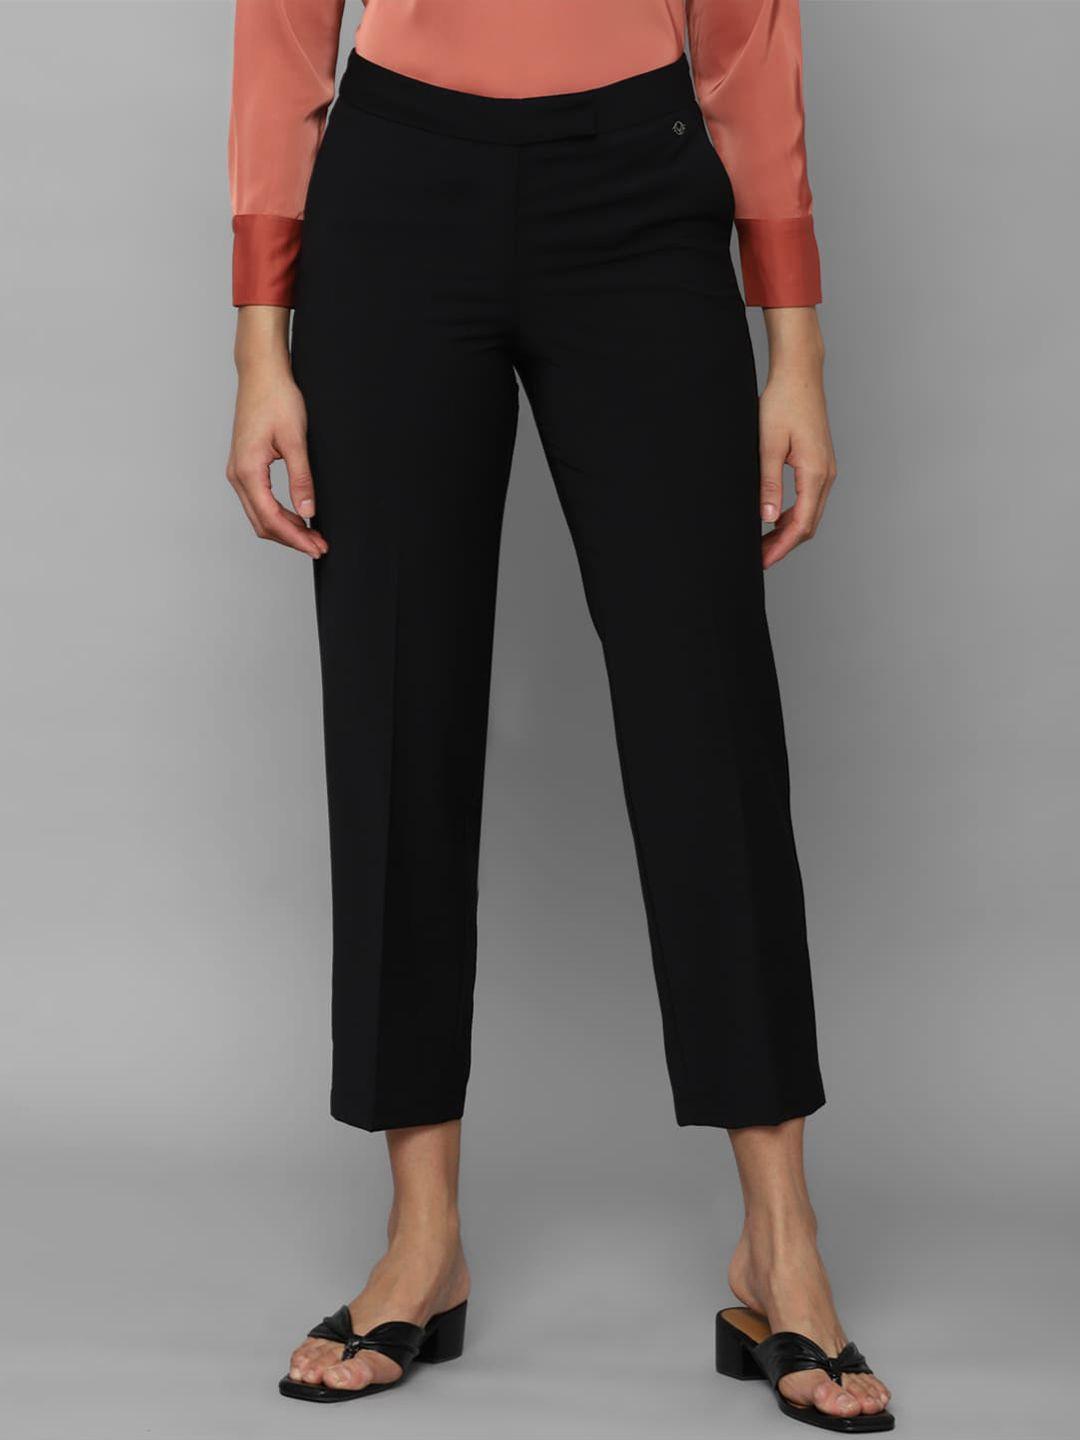 allen-solly-woman-mid-rise-regular-fit-trousers